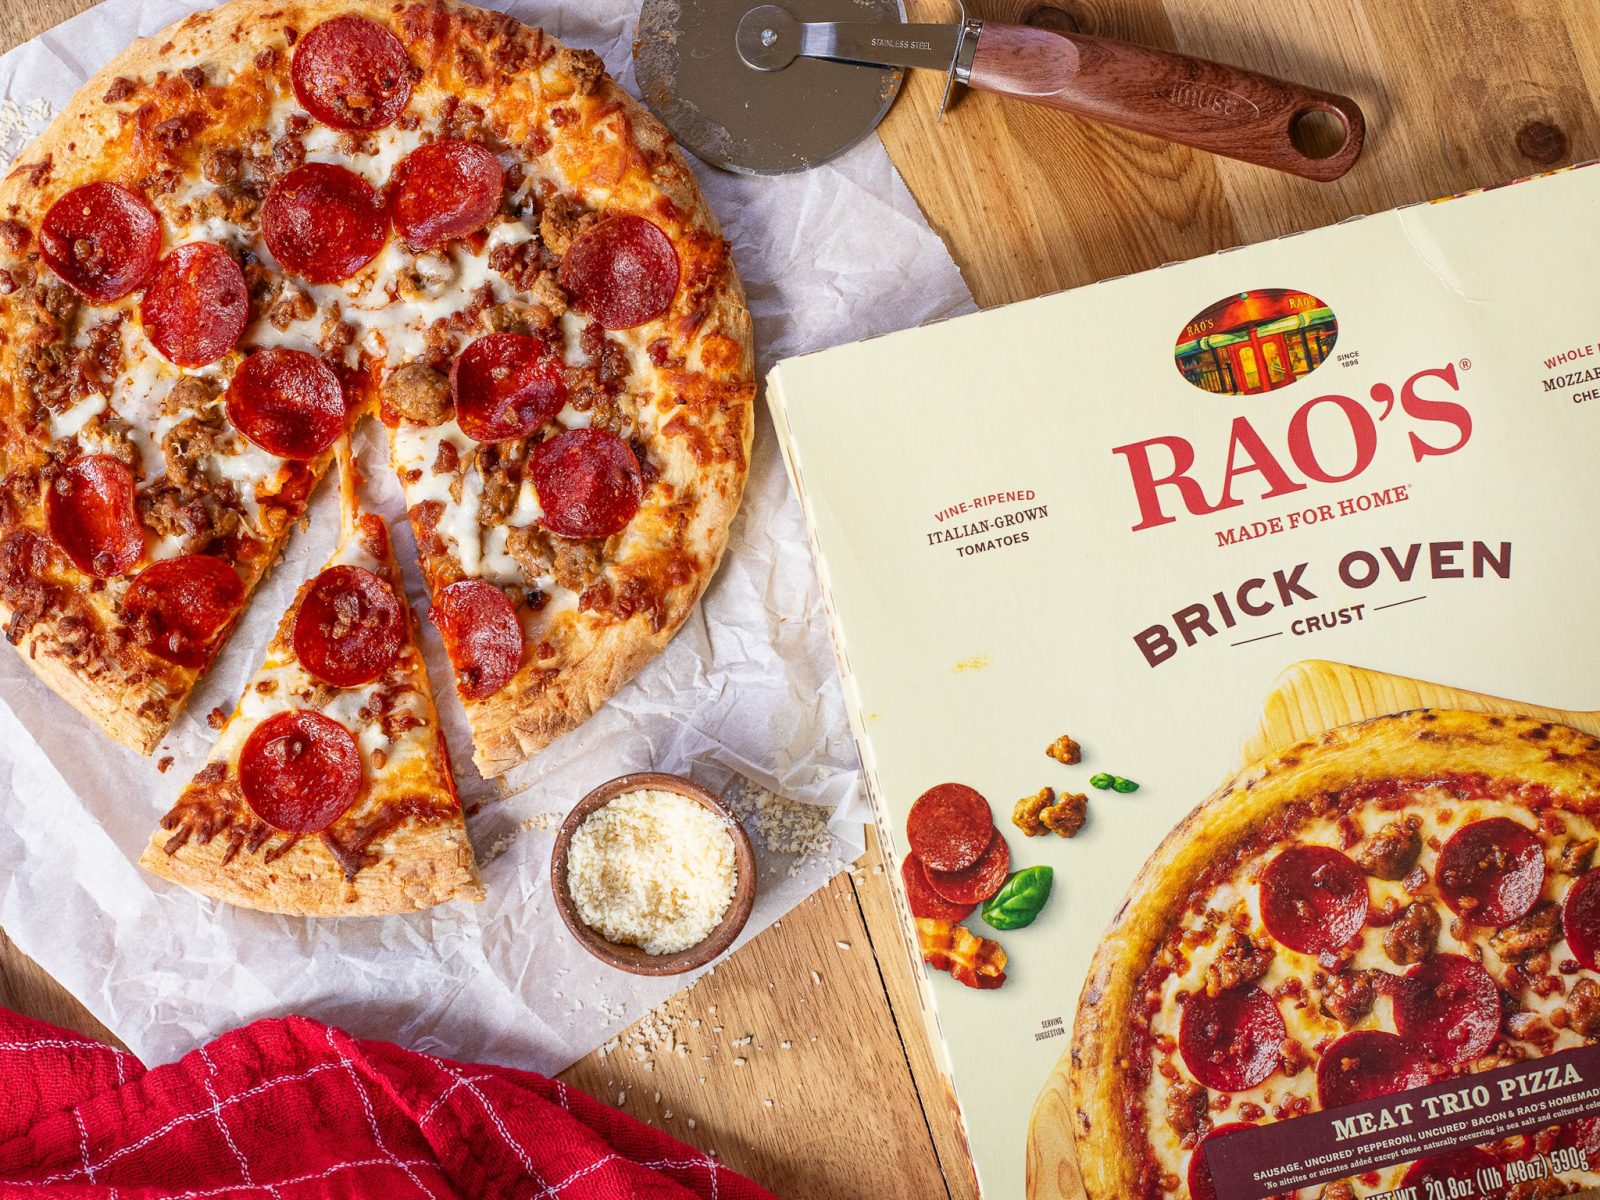 Grab Rao’s Brick Oven Pizza For As Low As $7.49 At Kroger (Regular Price $12.99)